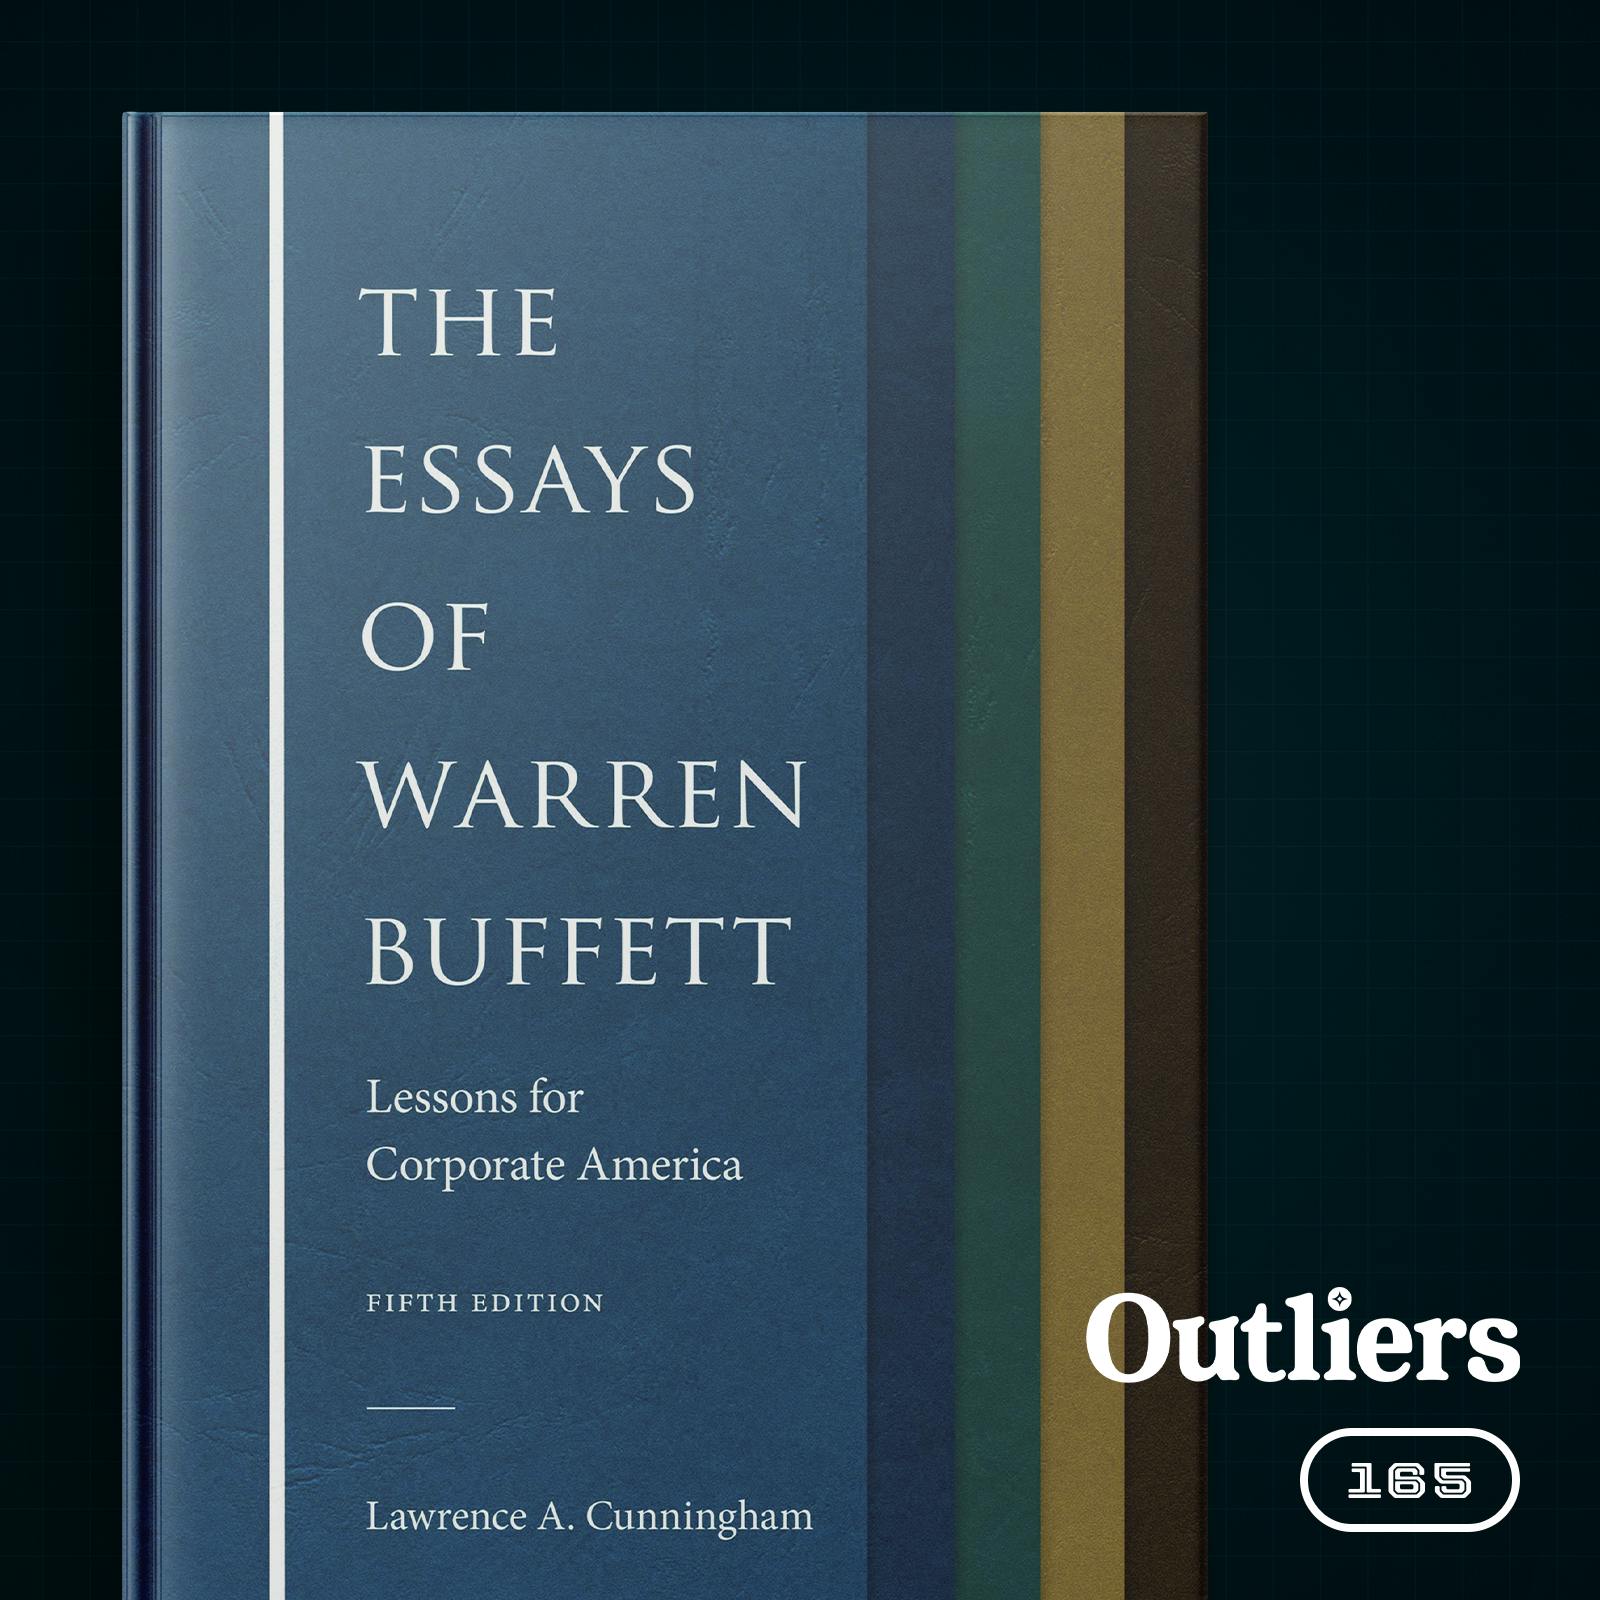 #165 Book Breakdown (1 of 2): “The Essays of Warren Buffett: Lessons for Corporate America” by Lawrence Cunningham | Outliers with Daniel Scrivner